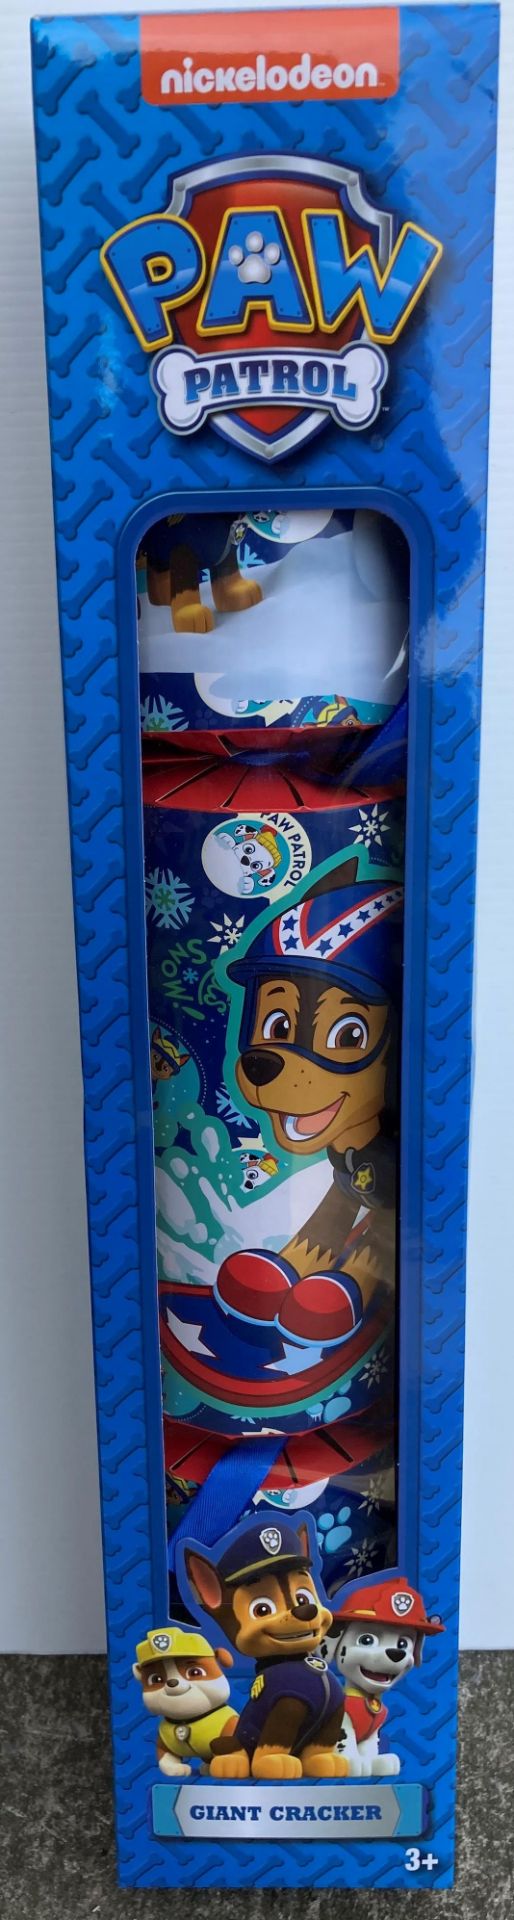 34 x Paw Patrol Giant Crackers (2 x outer boxes) (saleroom location: sport container)